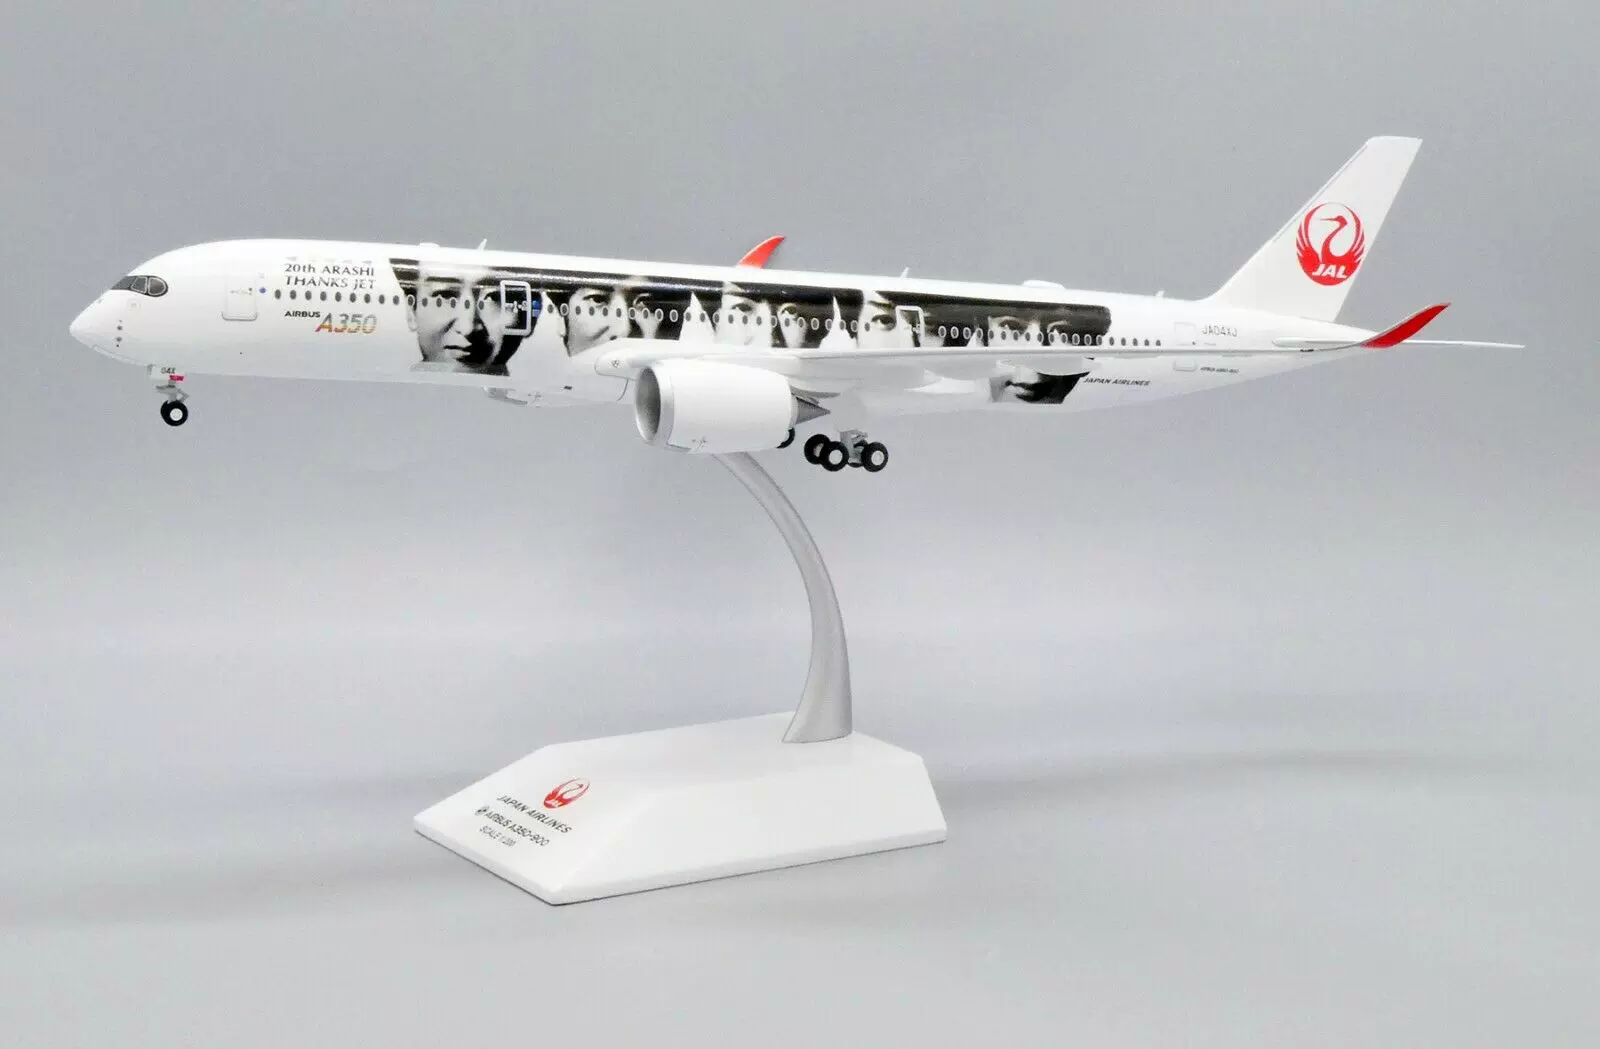 SALE／37%OFF】 @新品@日本航空A350-900JAL 嵐Thanksジェット1/400 